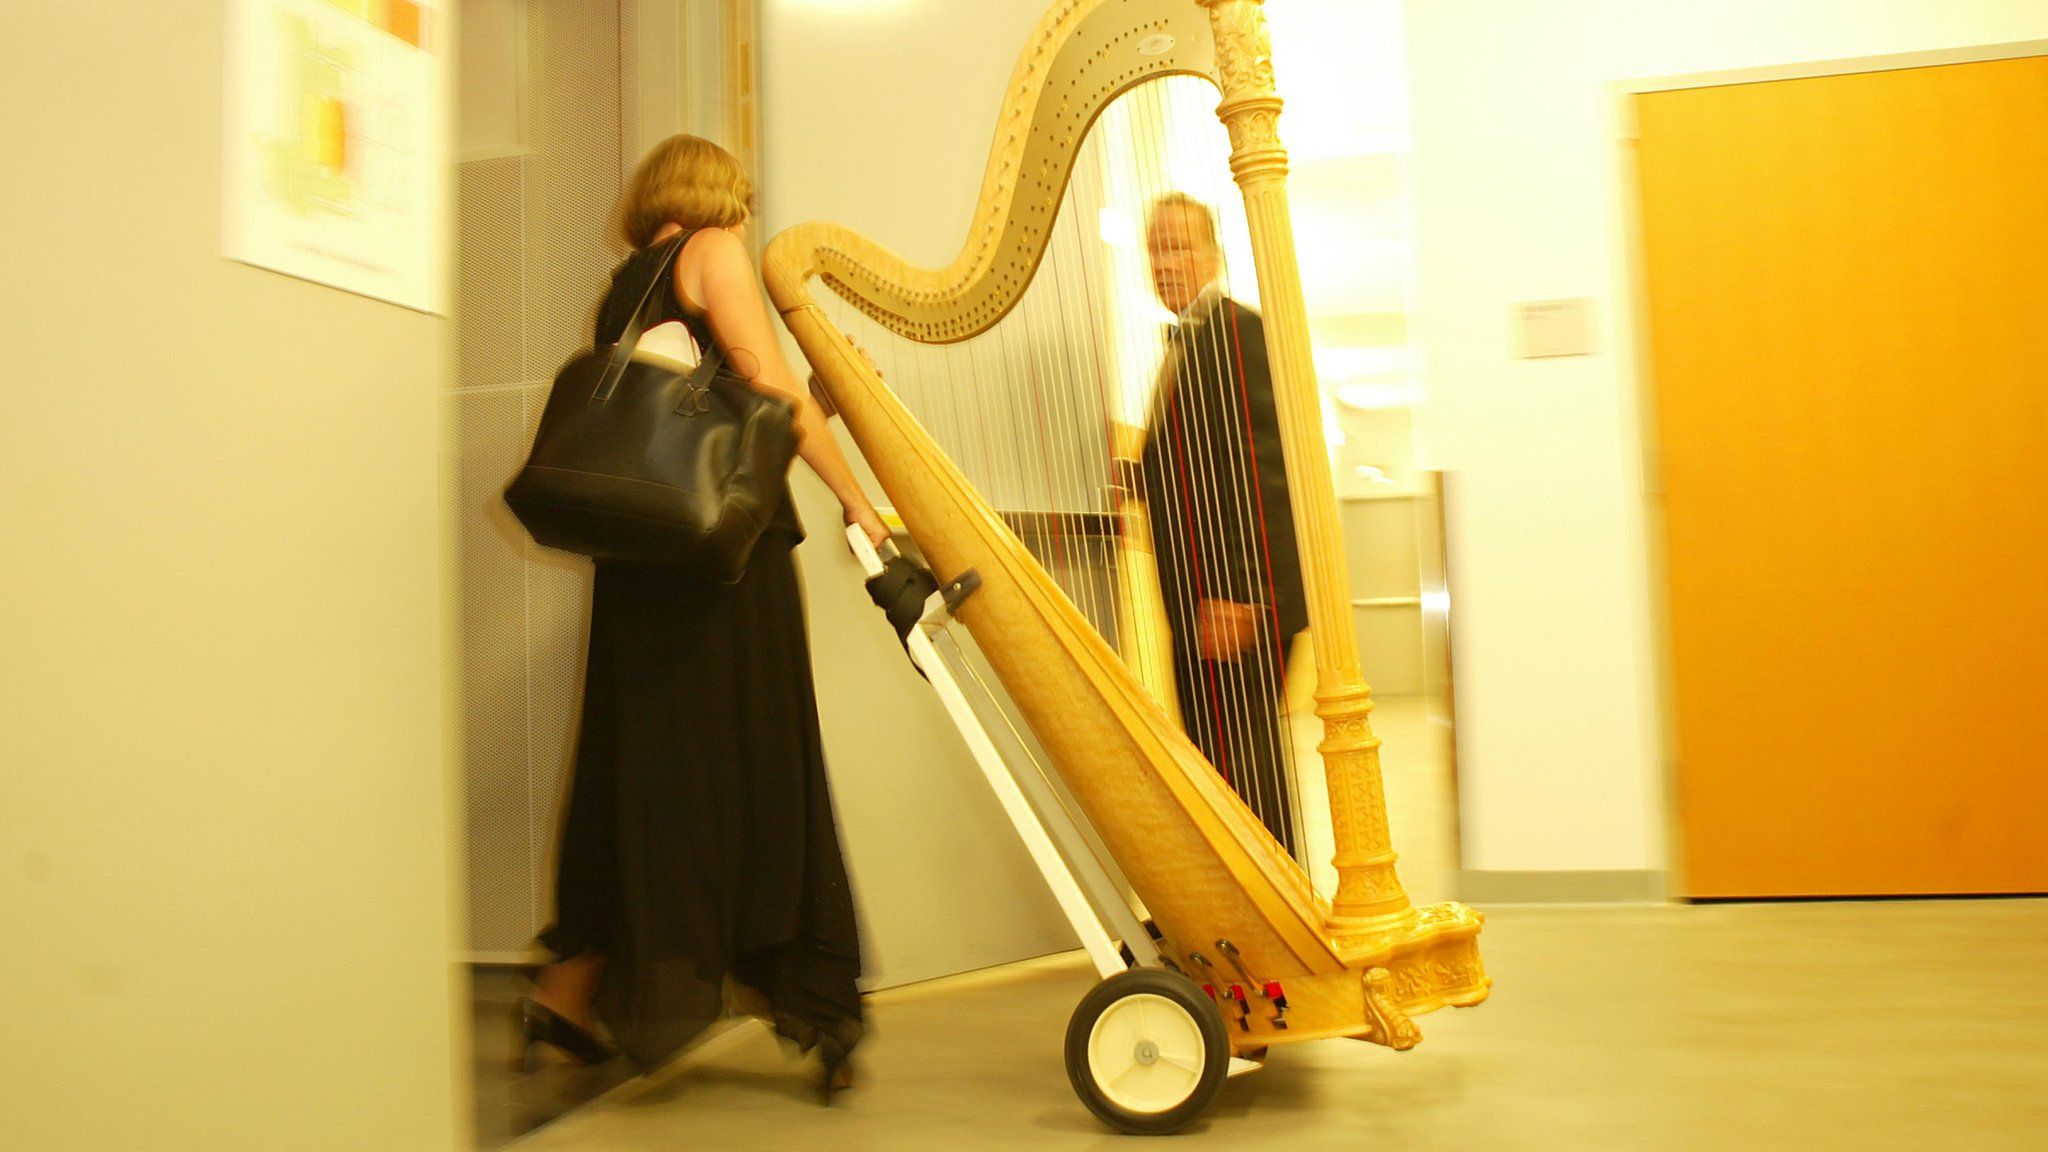 A woman carrying a harp